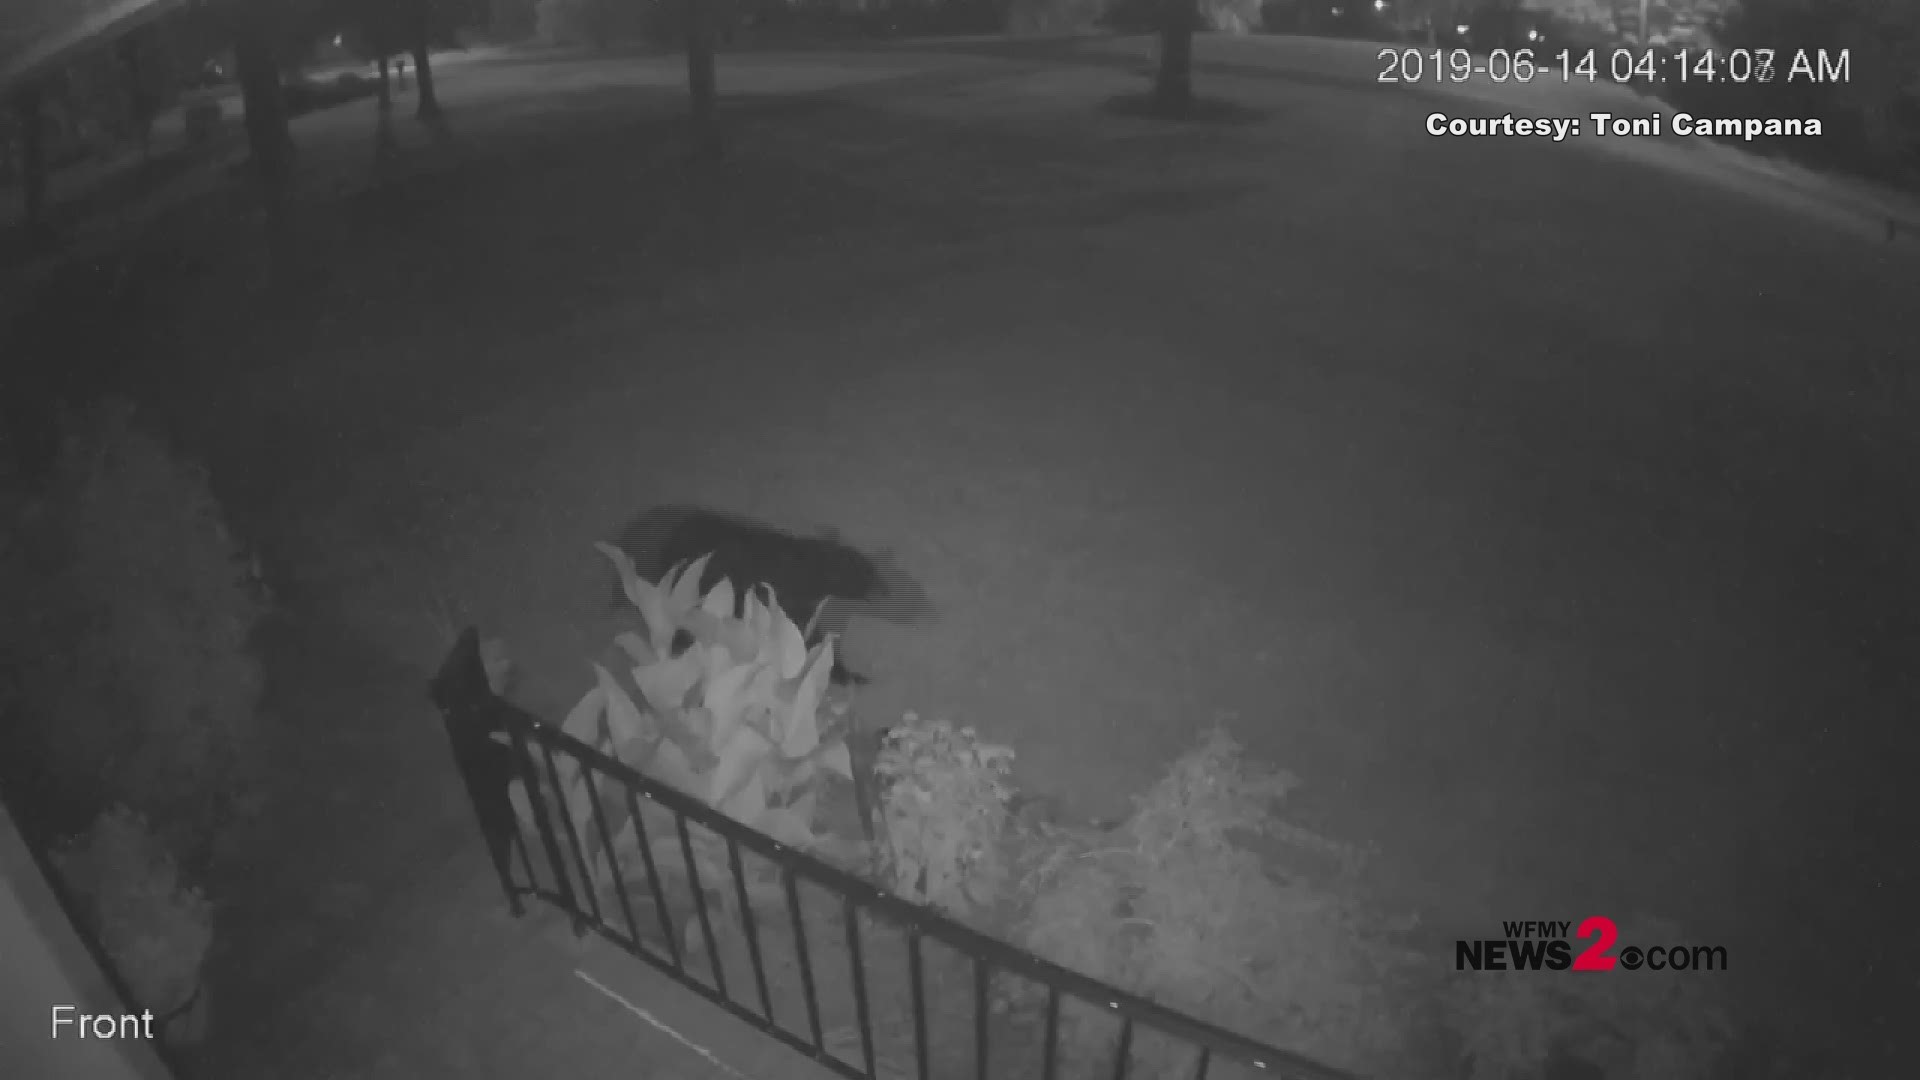 The bear was caught on camera on Woodlyn Way in the Sedgefield Lakes neighborhood in Greensboro early Friday morning.